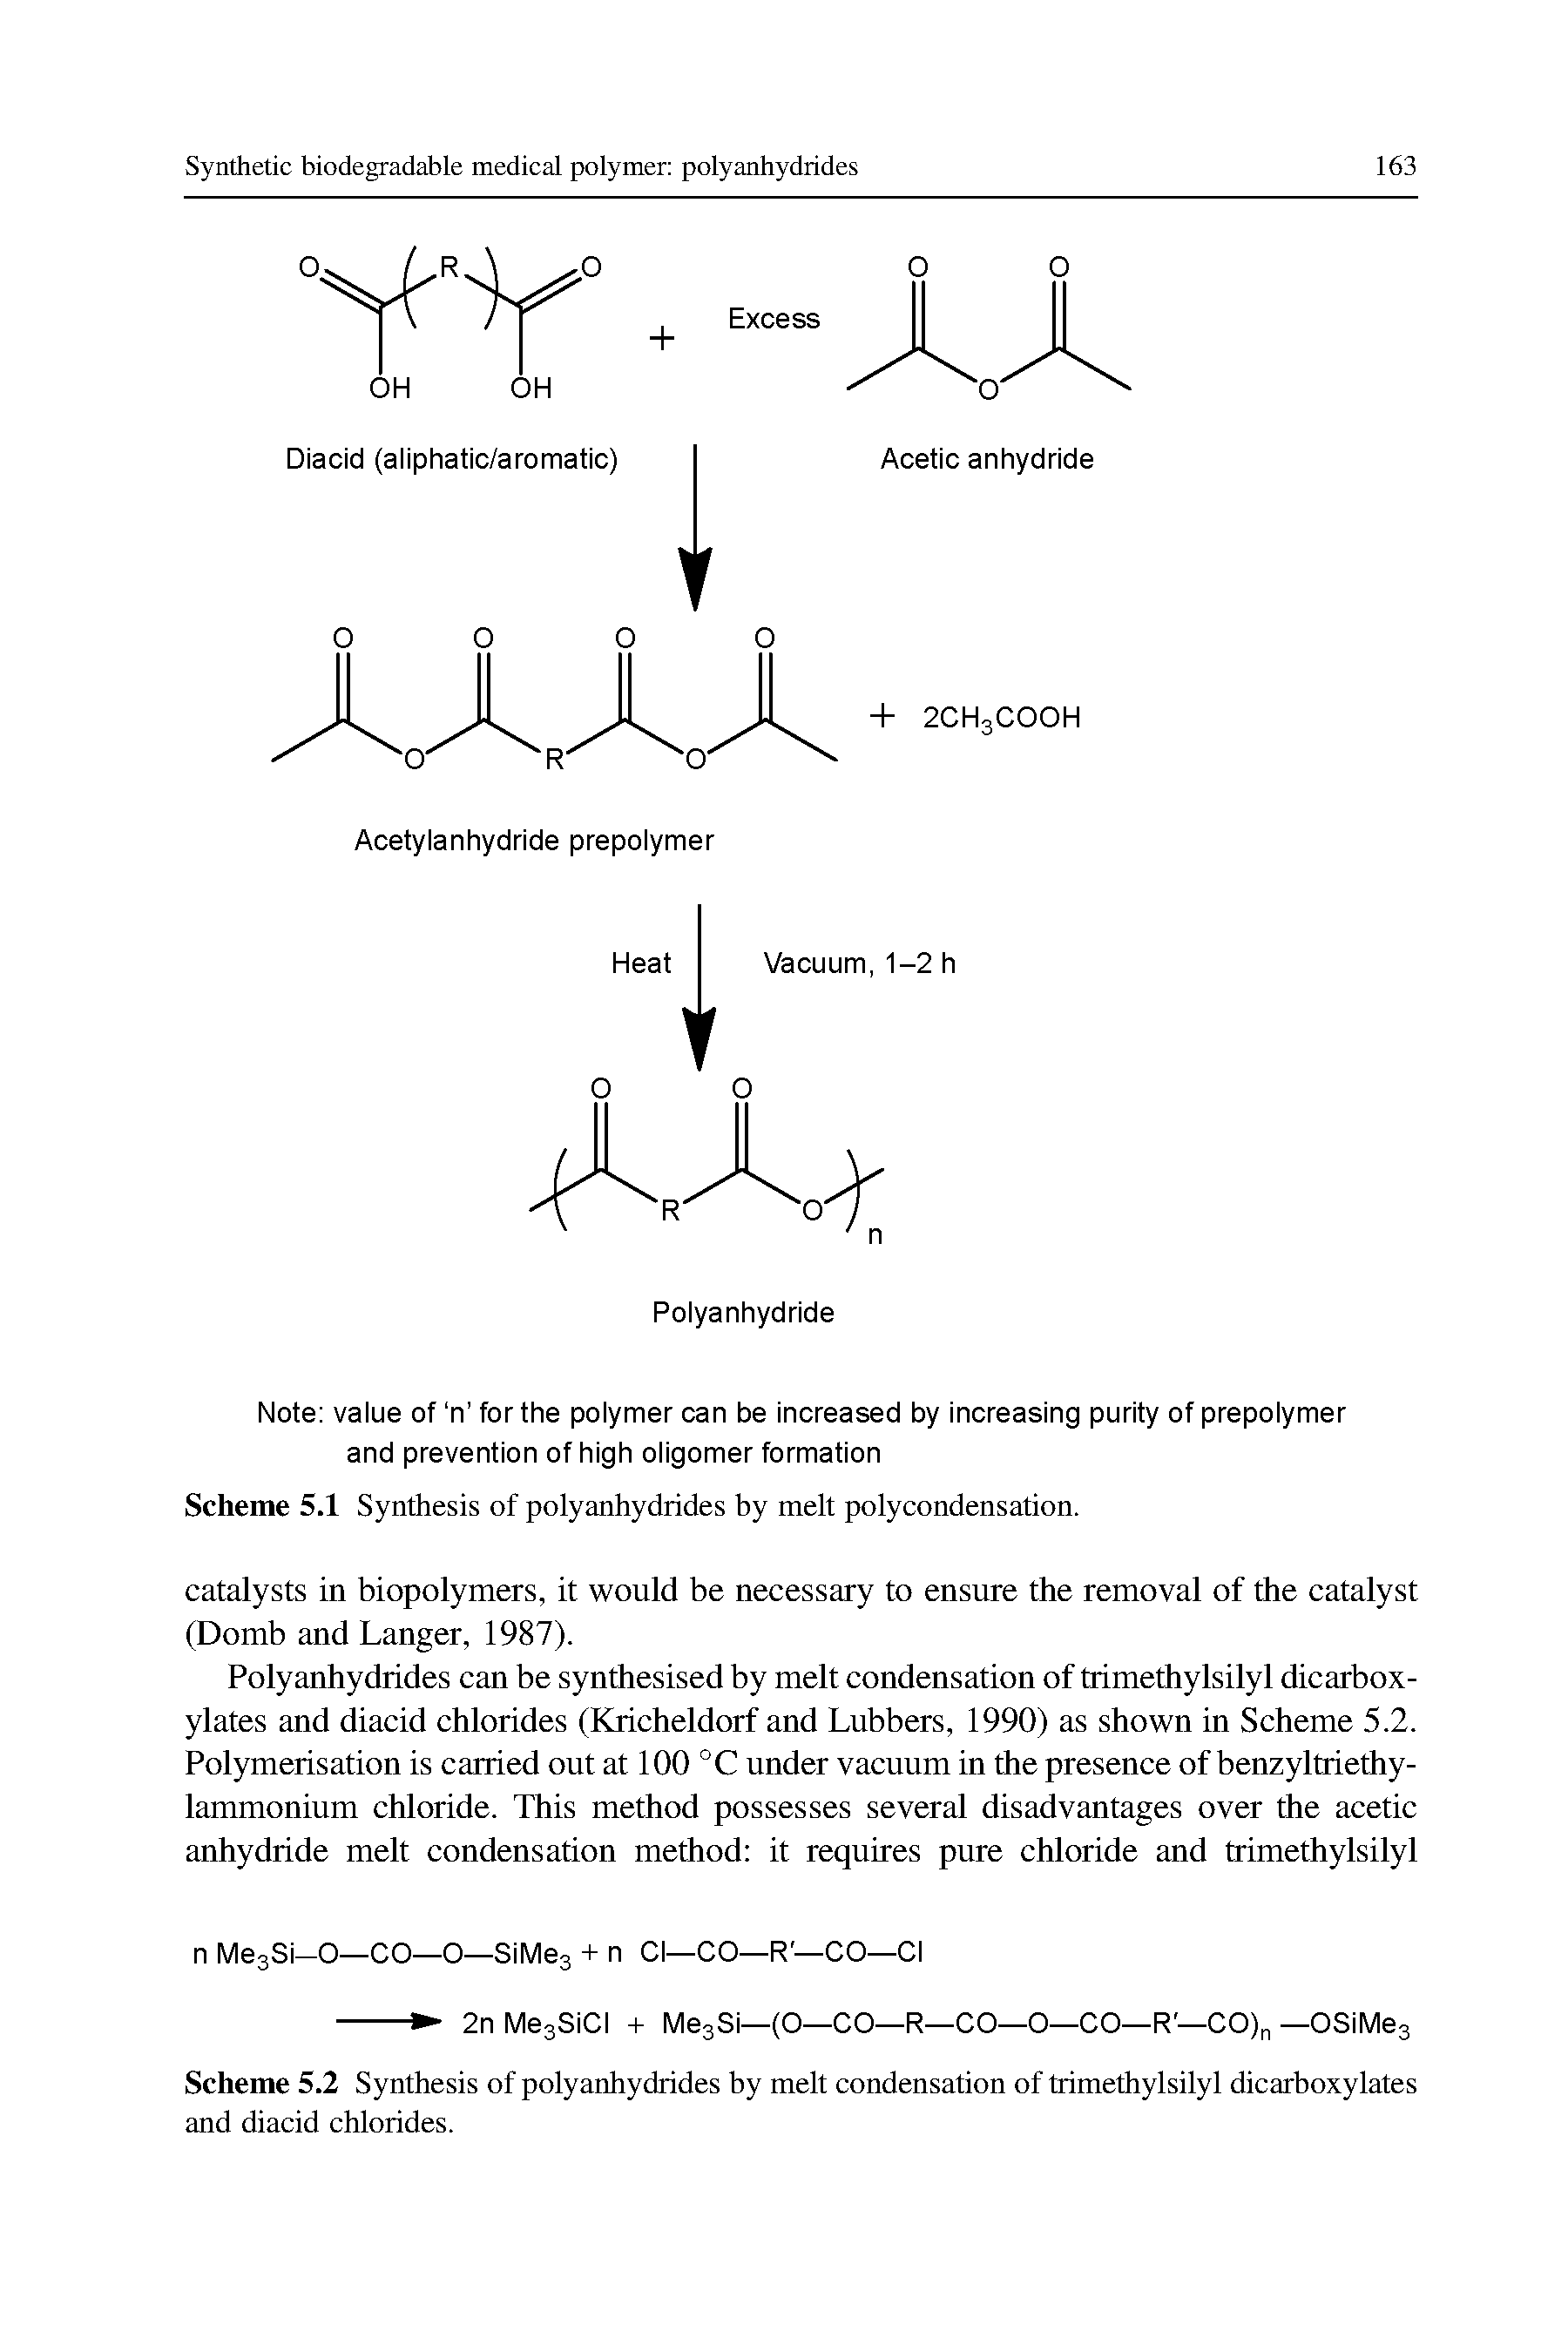 Scheme 5.2 Synthesis of polyanhydrides by melt condensation of trimethylsilyl dicarboxylates and diacid chlorides.